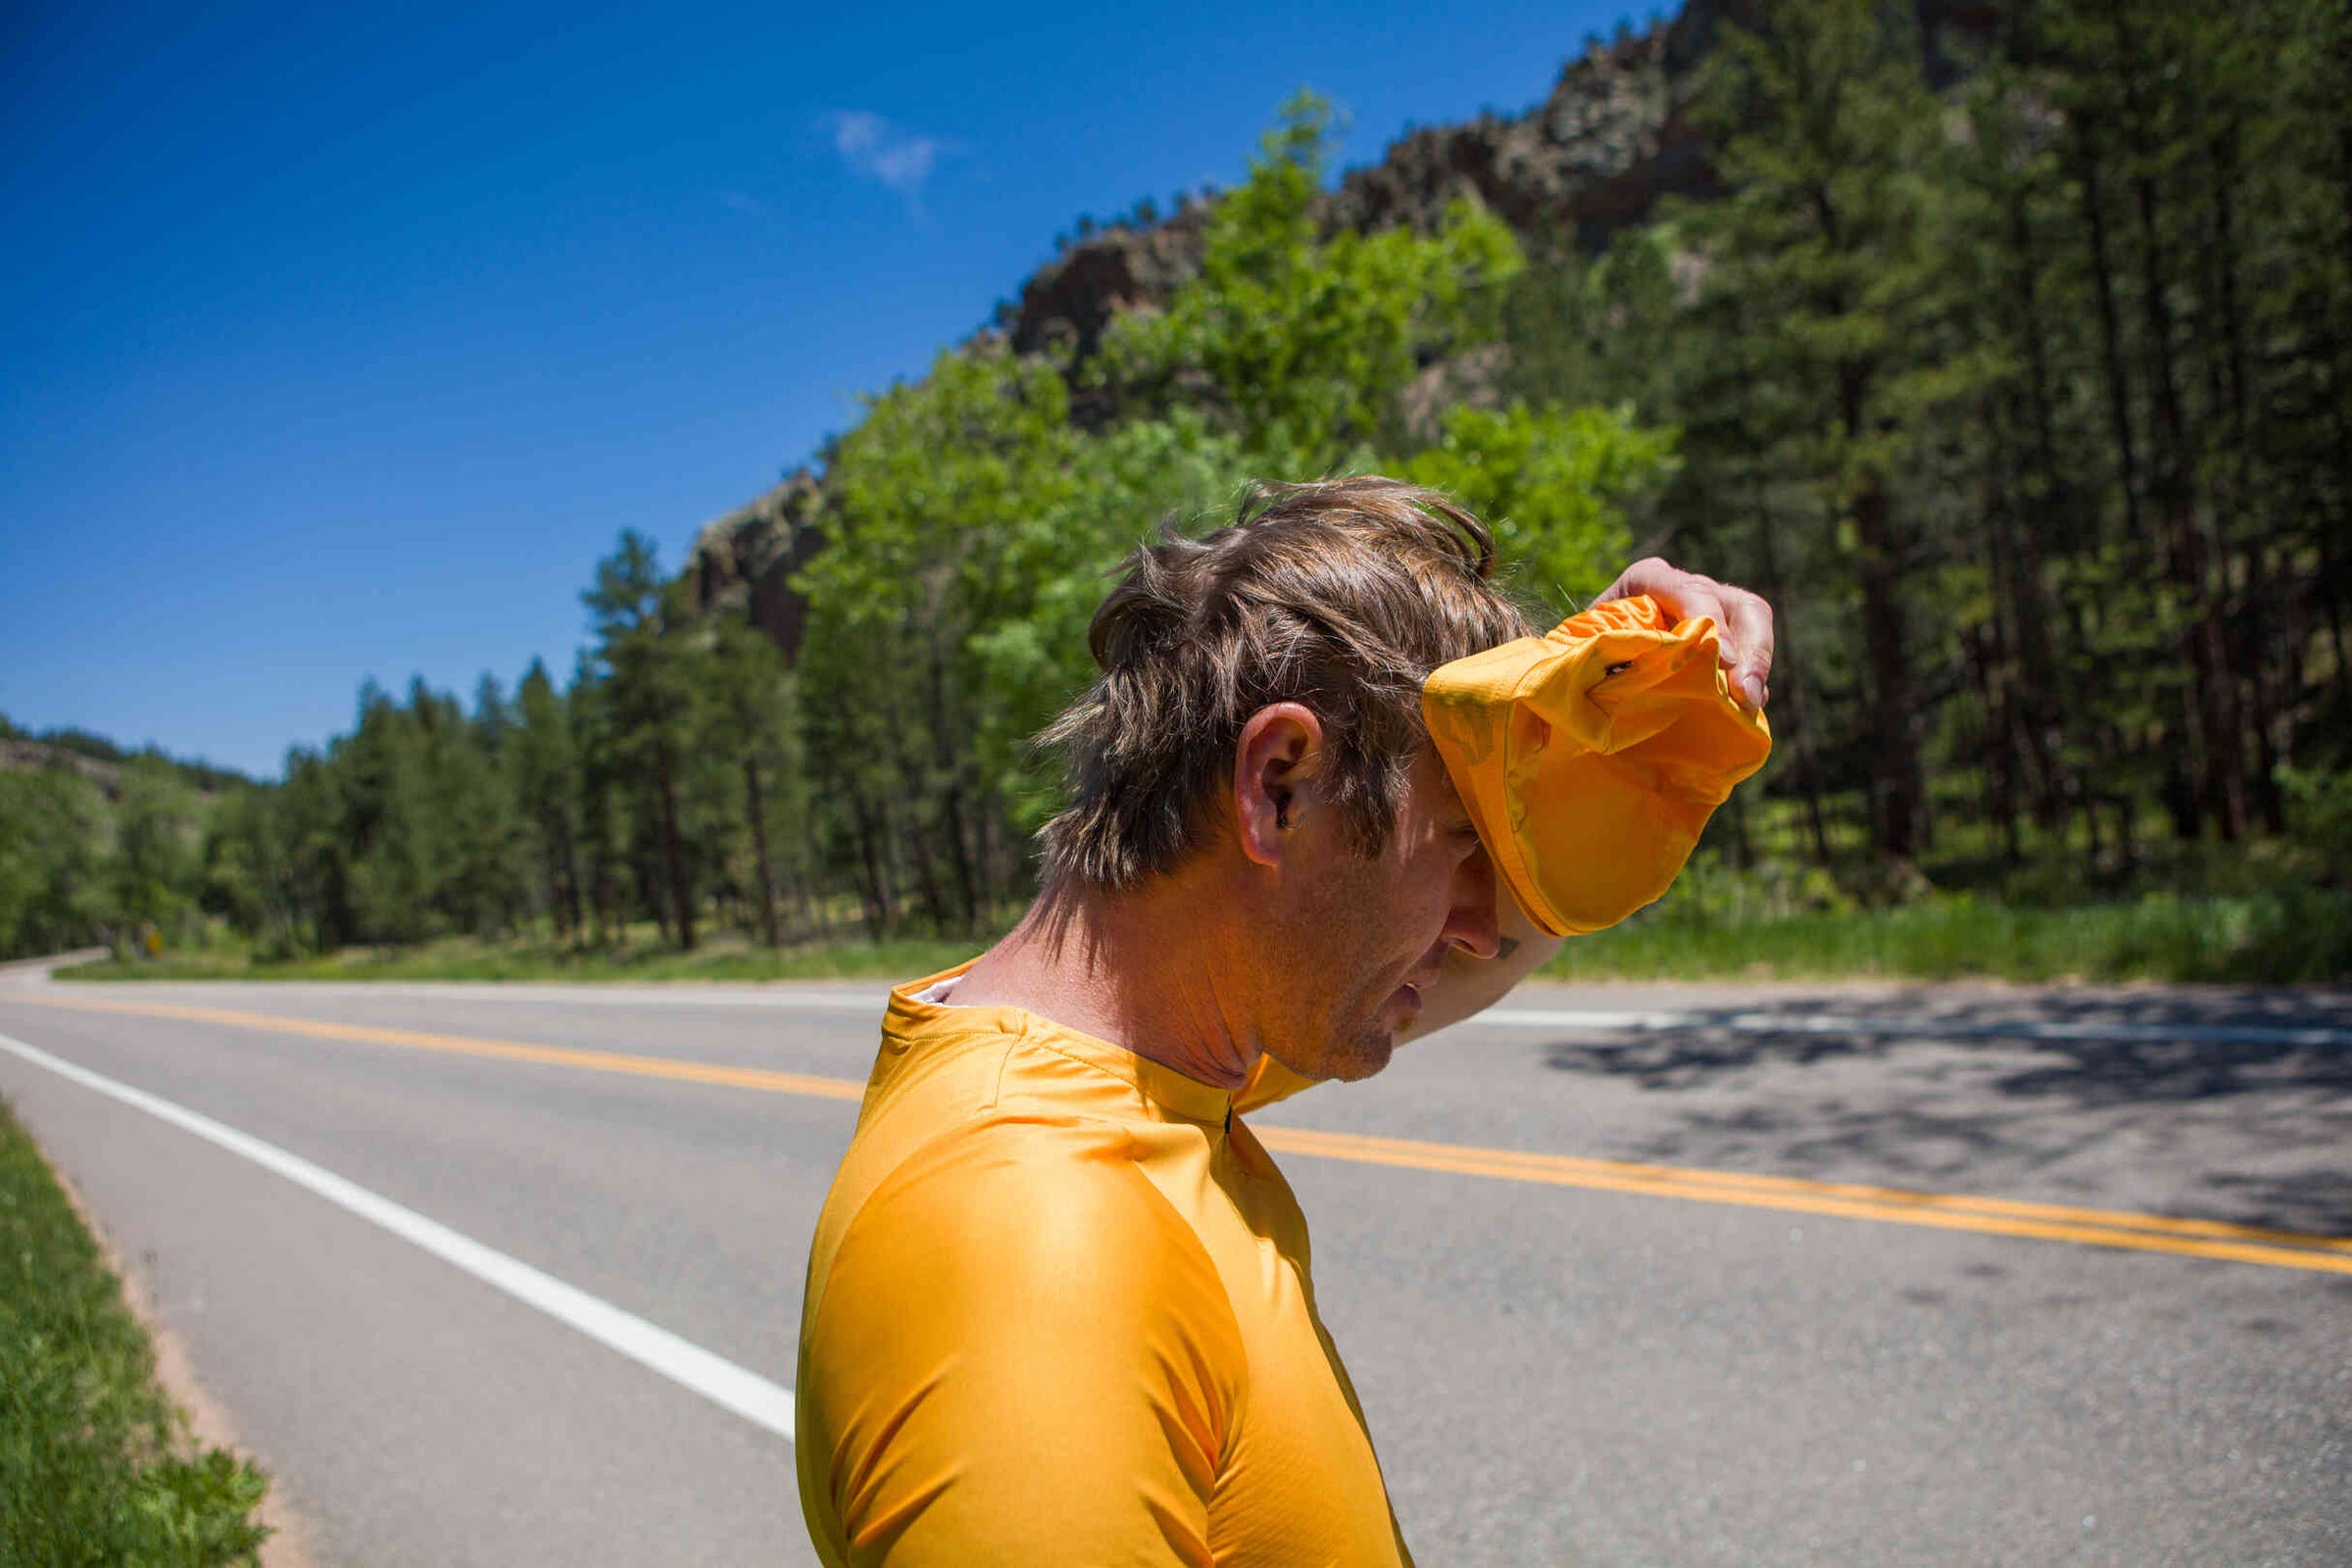 Dealing with Heat and Cycling